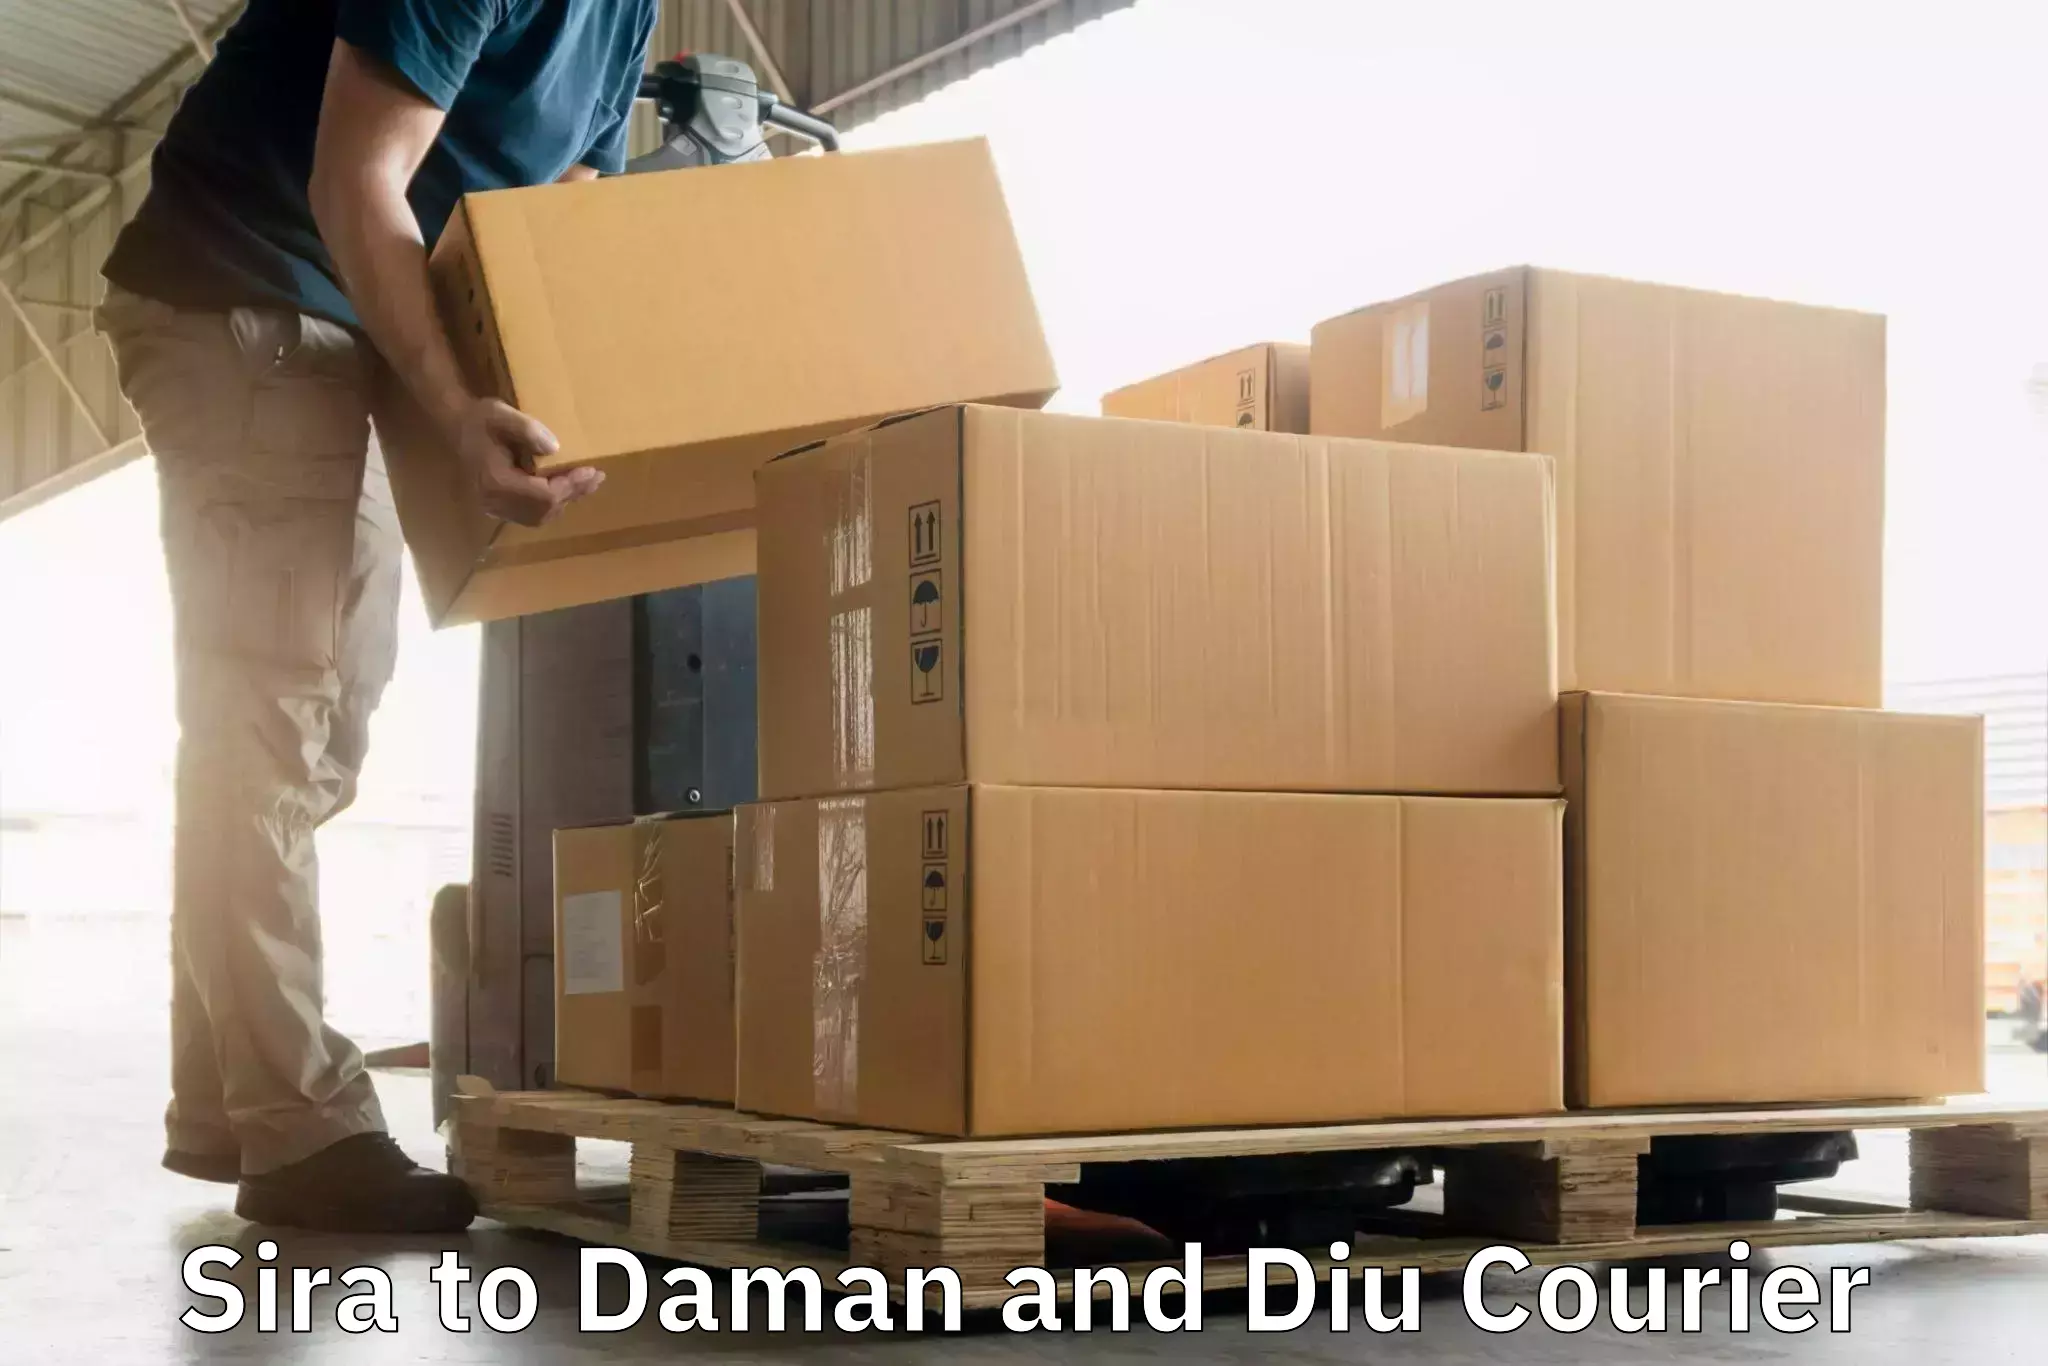 Modern courier technology in Sira to Daman